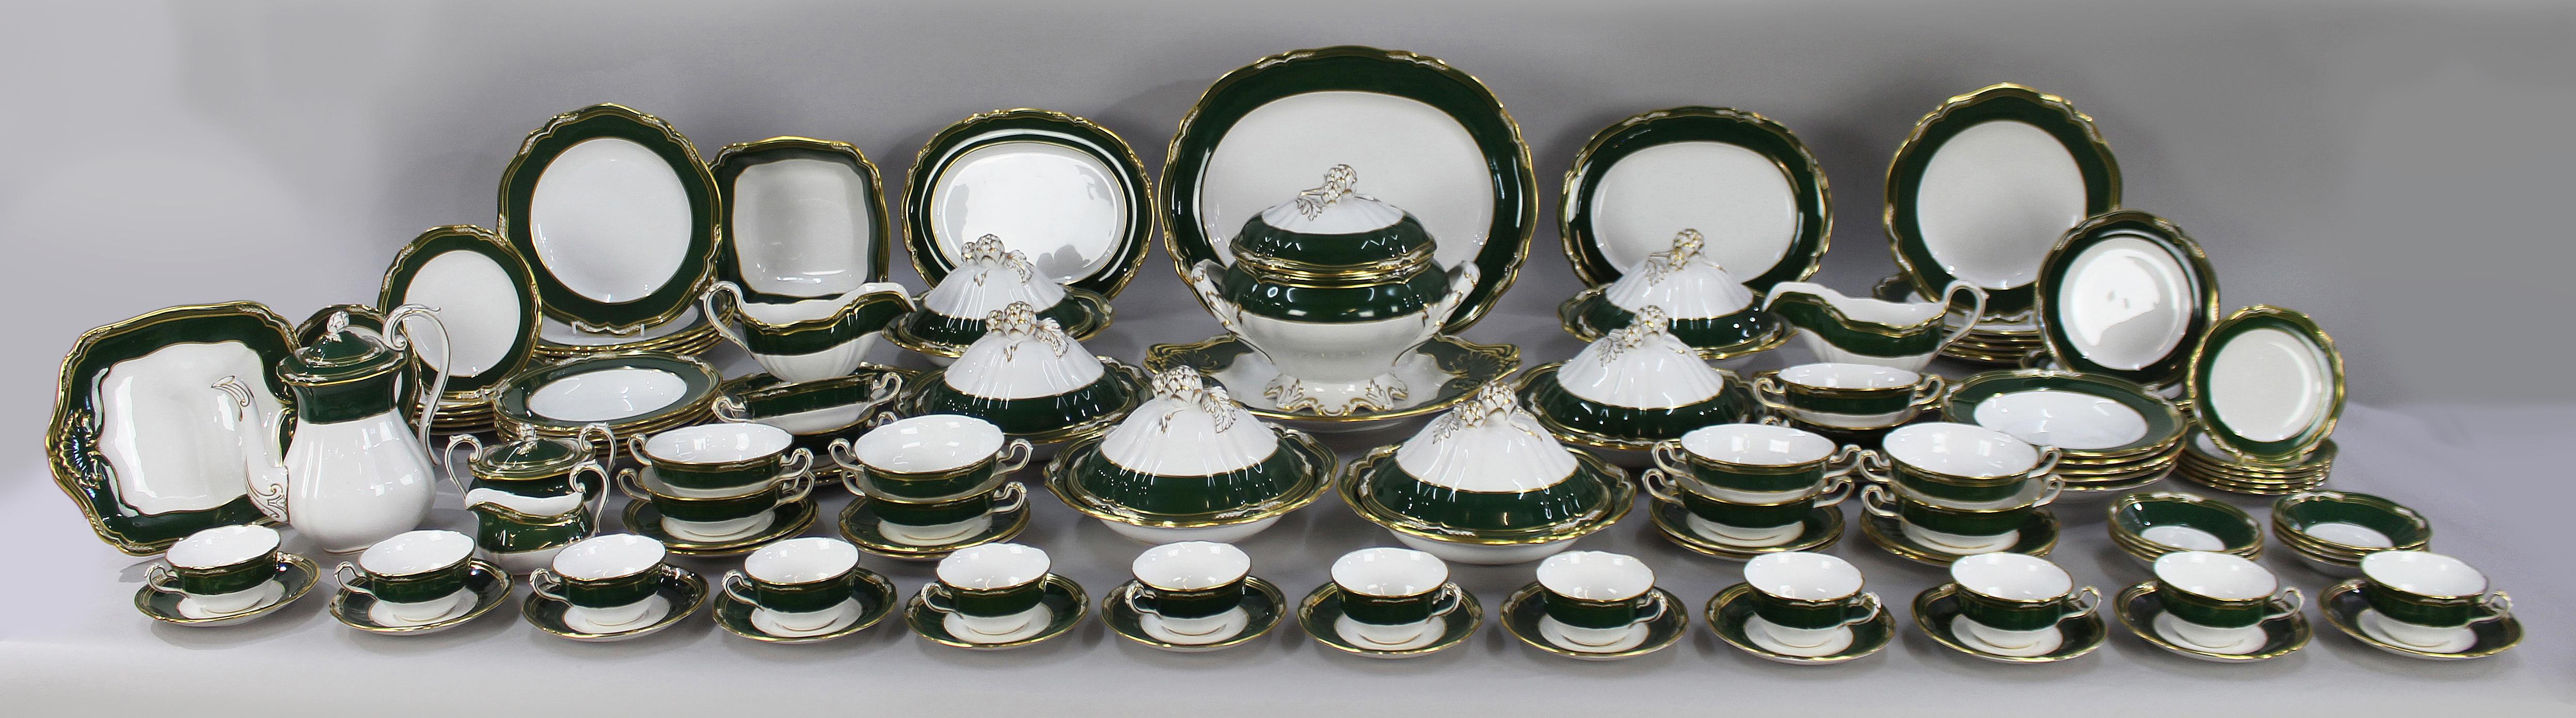 Very fine Spode Harrogate complete 12 place dinner & tea service 


Period Late 20th century, English, c.1980

Manufacturer Spode, Harrogate pattern, all pieces stamped by the factory to the underside

Total: All pieces pictured, total 137